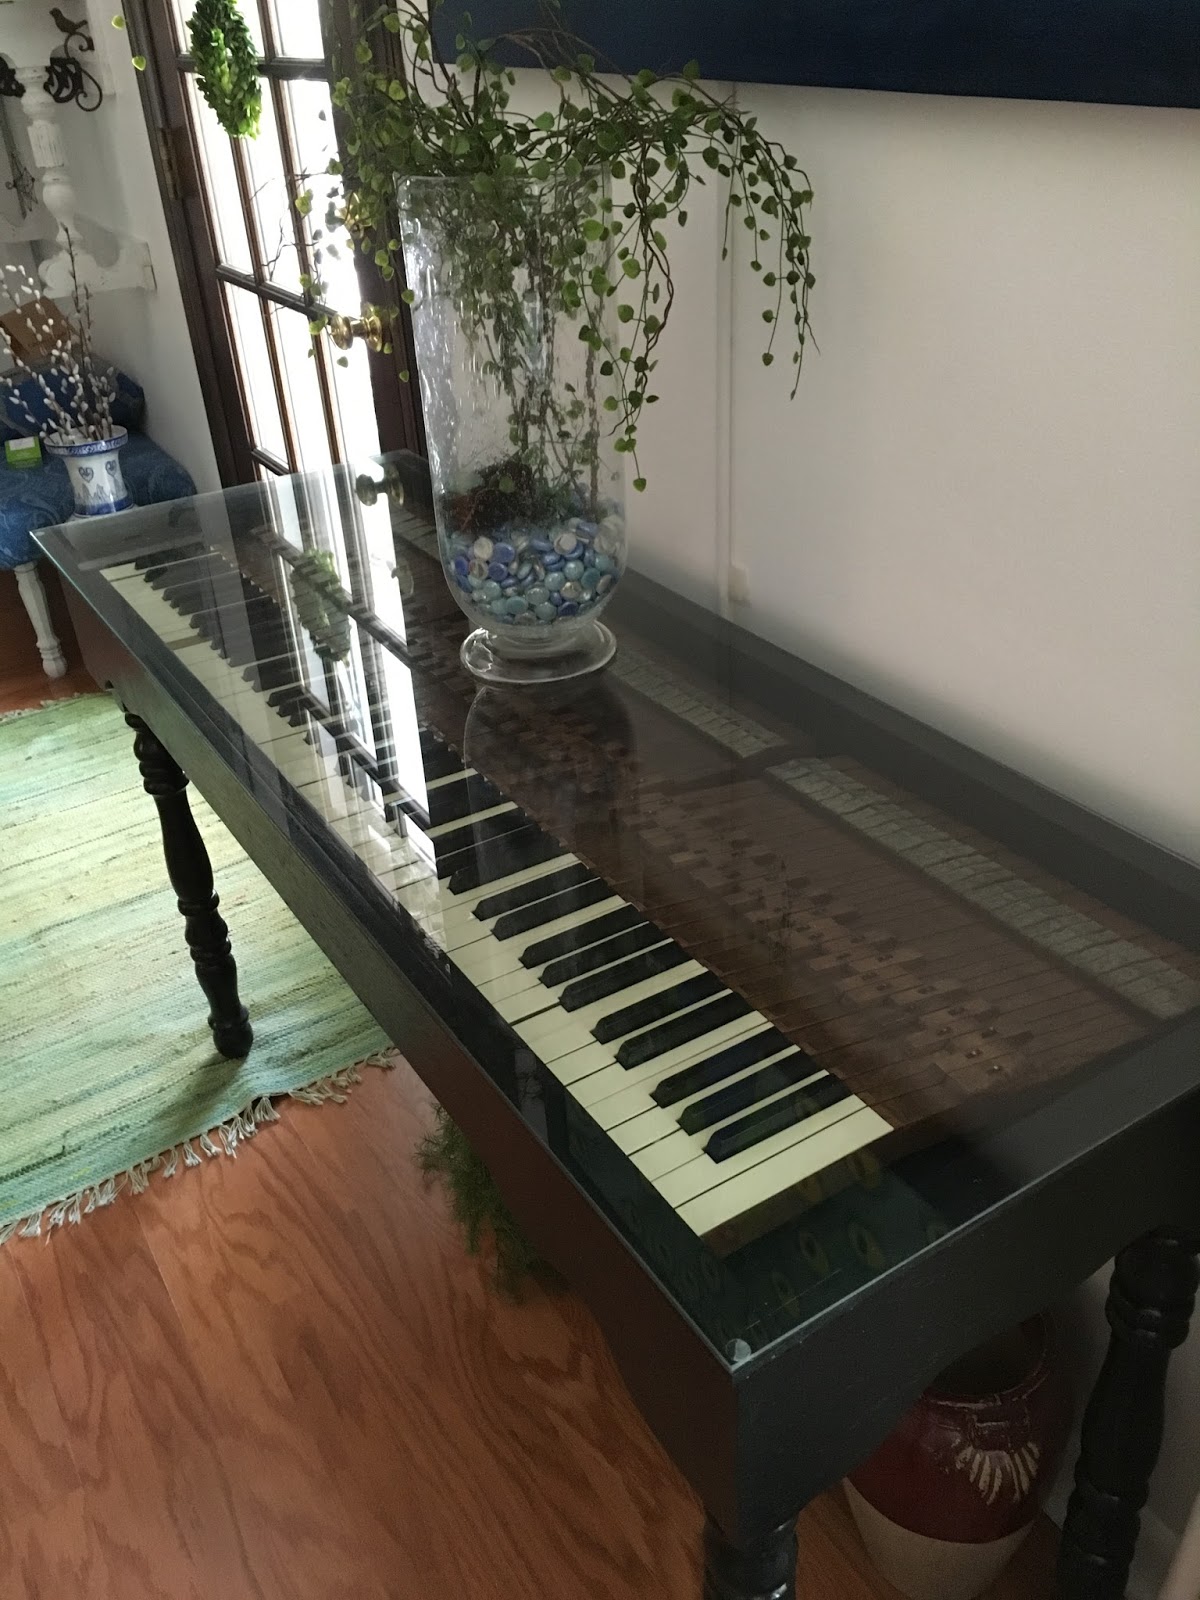 Repurposed For Life: RE-PLAY OF PIANO KEYBOARD